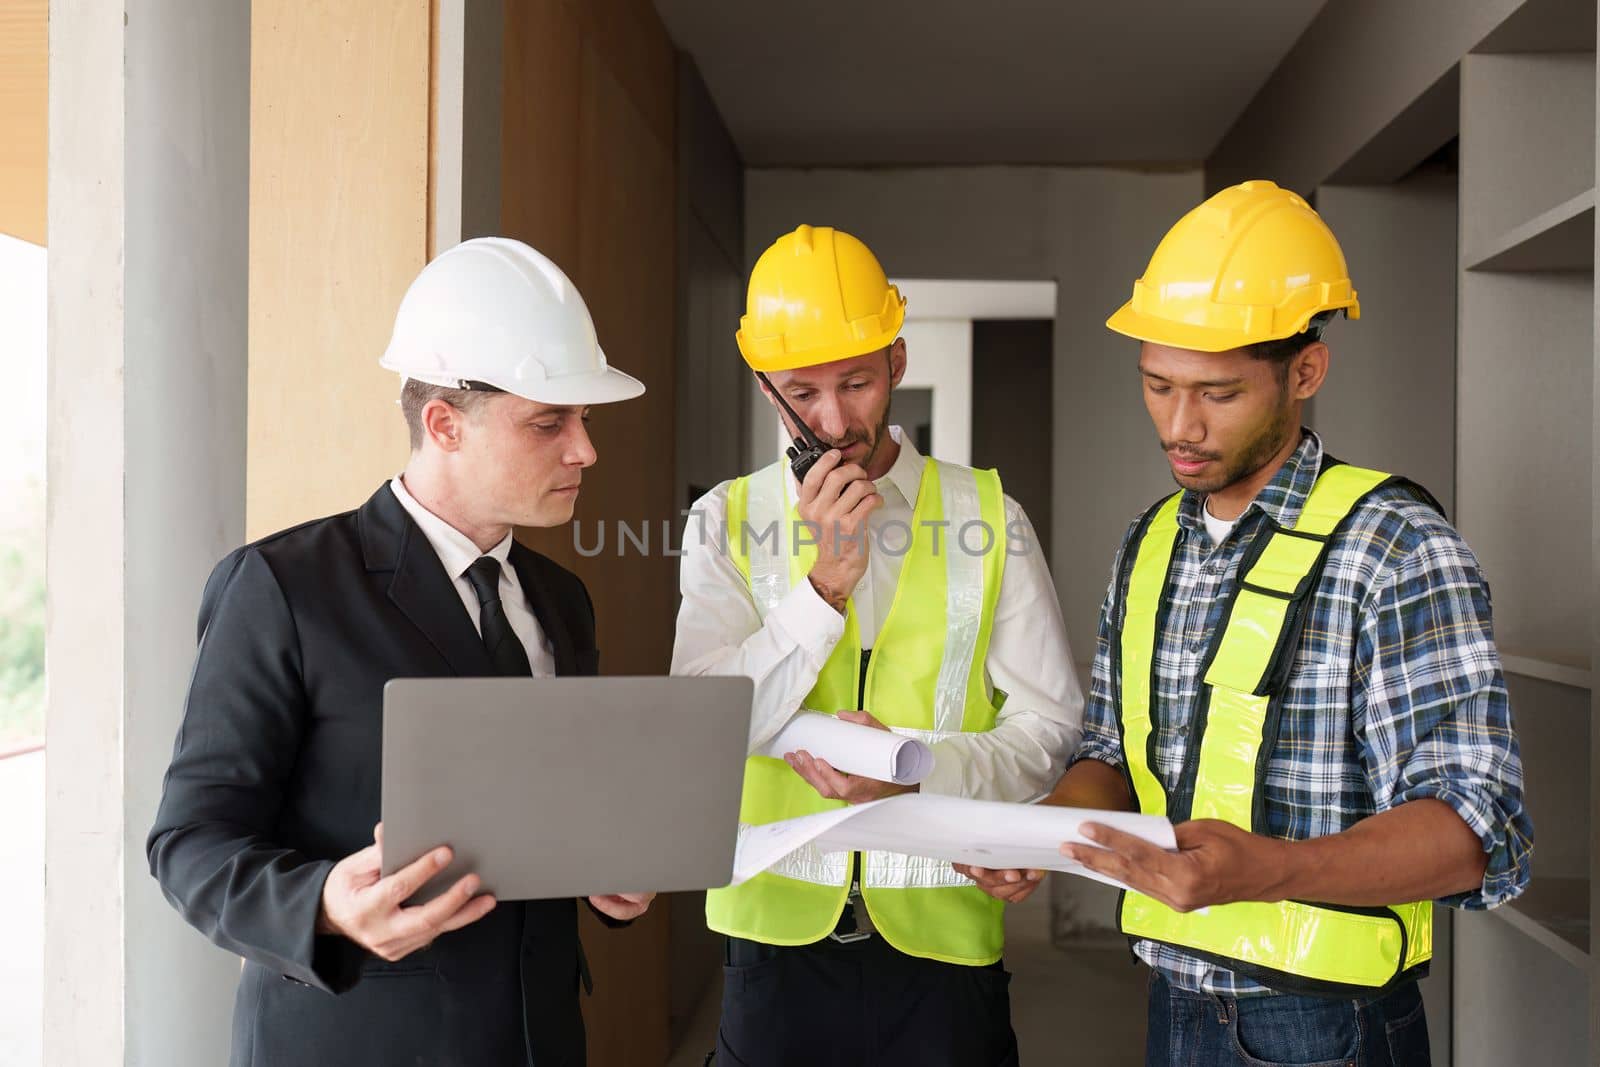 Civil Construction team working at renovate construction site. architectural plan, engineer sketching a construction project, green energy concept